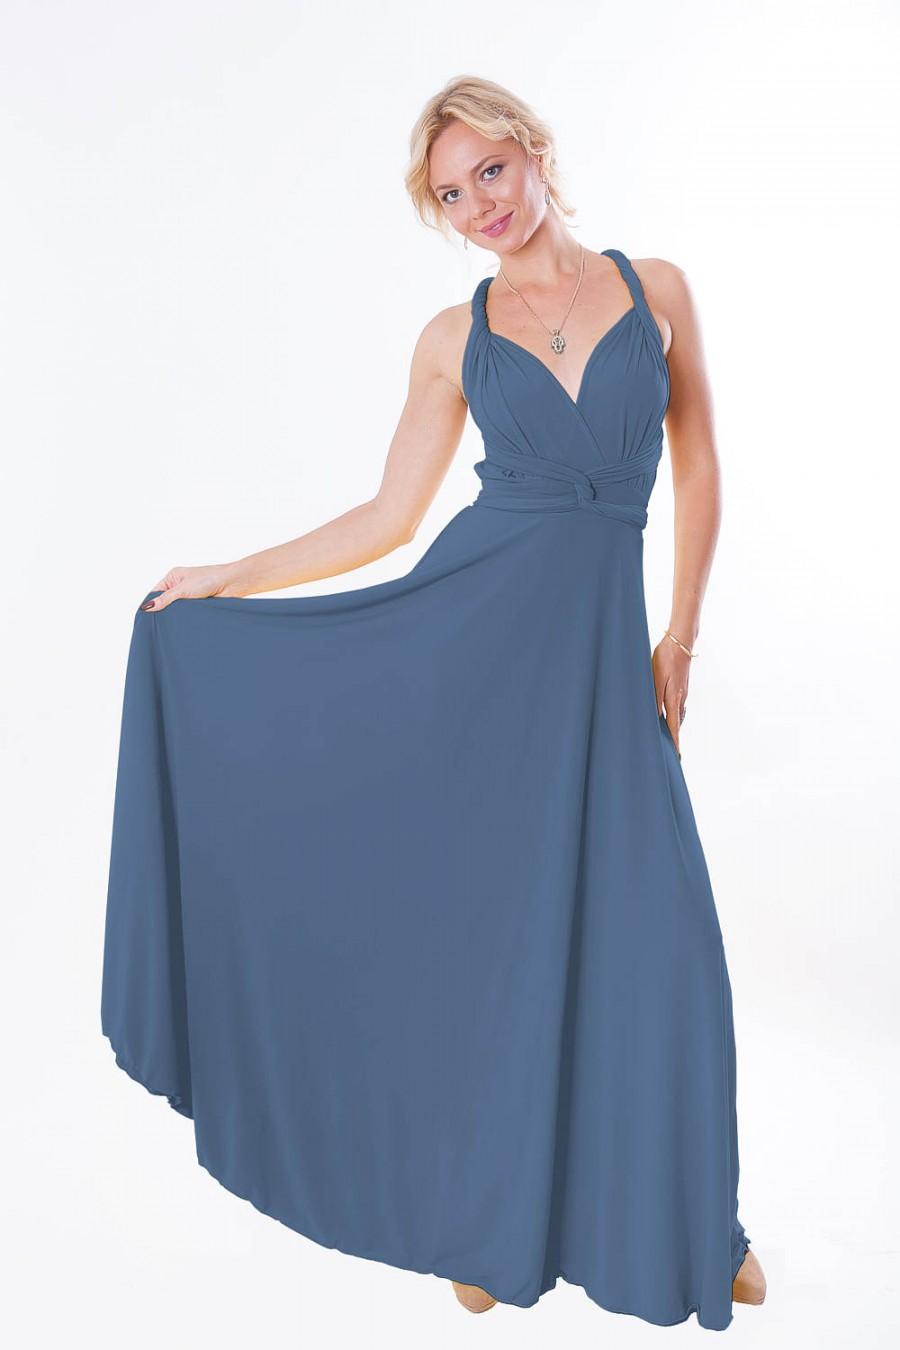 Wedding - Convertible/Infinity Dress - floor length with long straps  in jeans color wrap dress